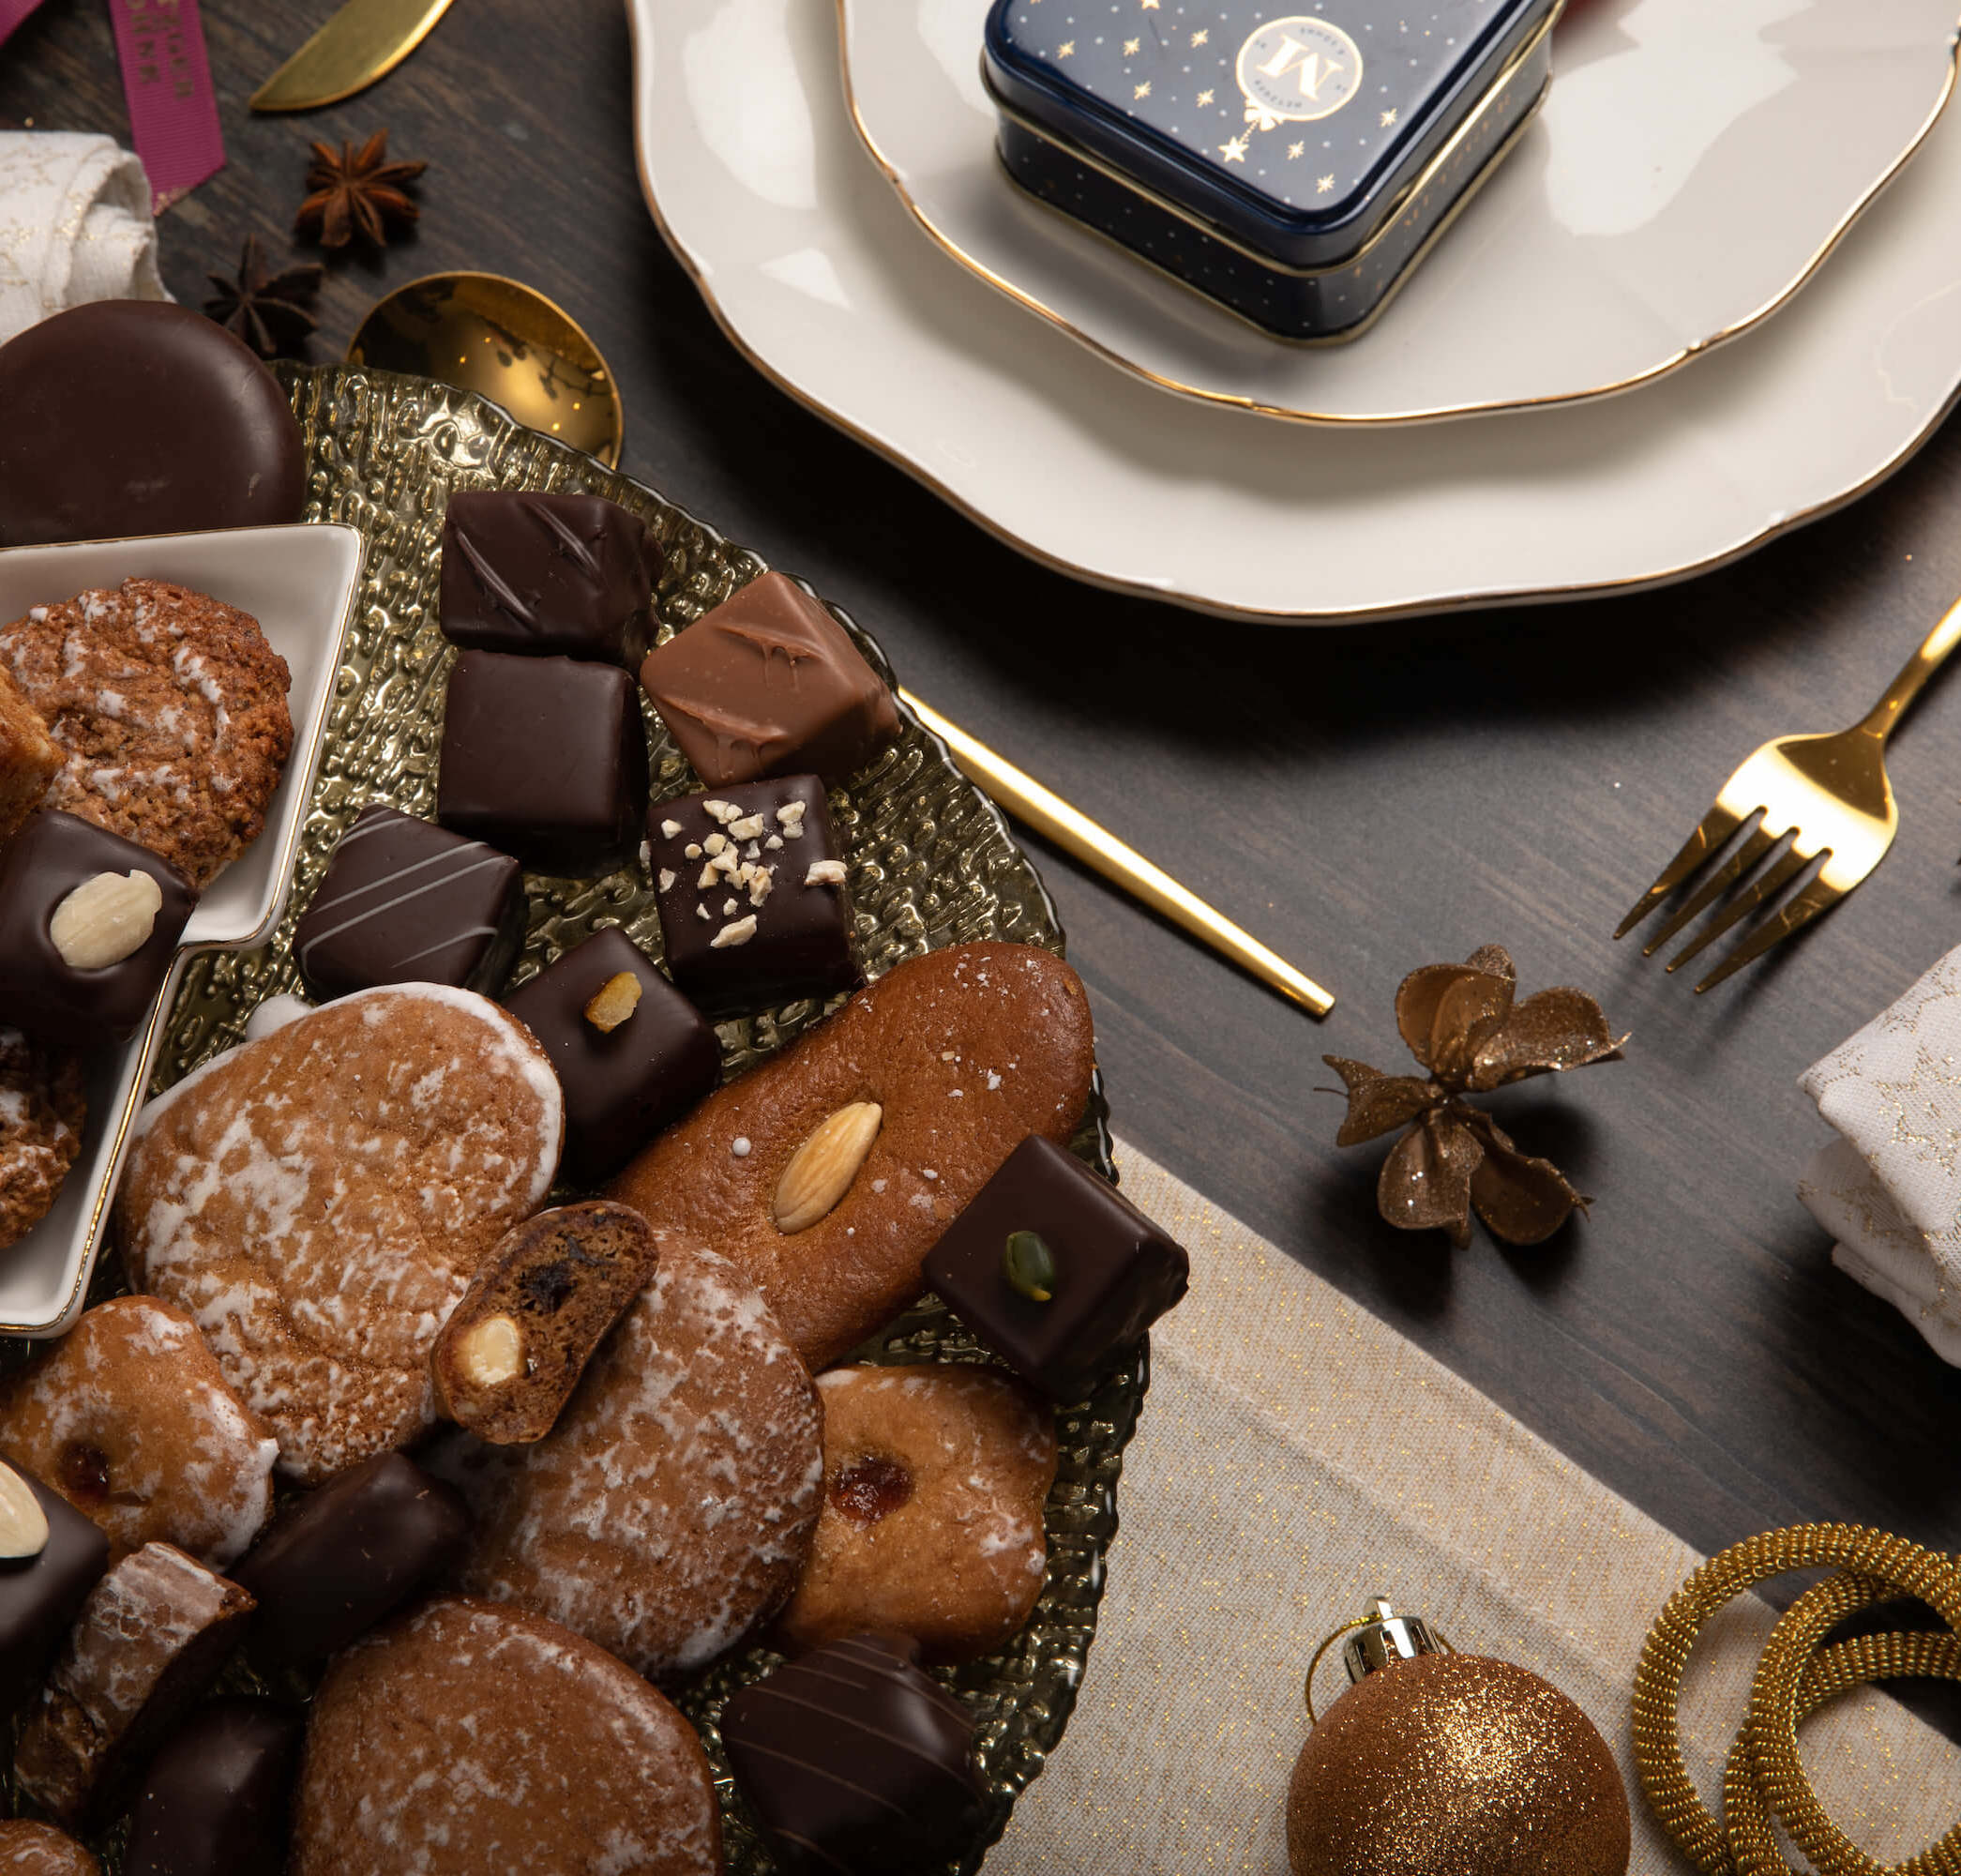 Luxury Metzger gift tin in navy blue, filled with our popular Lebkuchen cookies and chocolate pralines. There are 10 opulent praline types, from marzipan mixes to fruit jellies, jams and nut fillings, coated in chocolate. The Lebkuchen cookies include our fruit bread with dried fruits and nuts, basler with a cherry undertone, chocolate robbins, signature house Lebkuchen and Aranzini Lebkuchen minis. A perfect Lebkuchen taster gift or selection for the Christmas table.